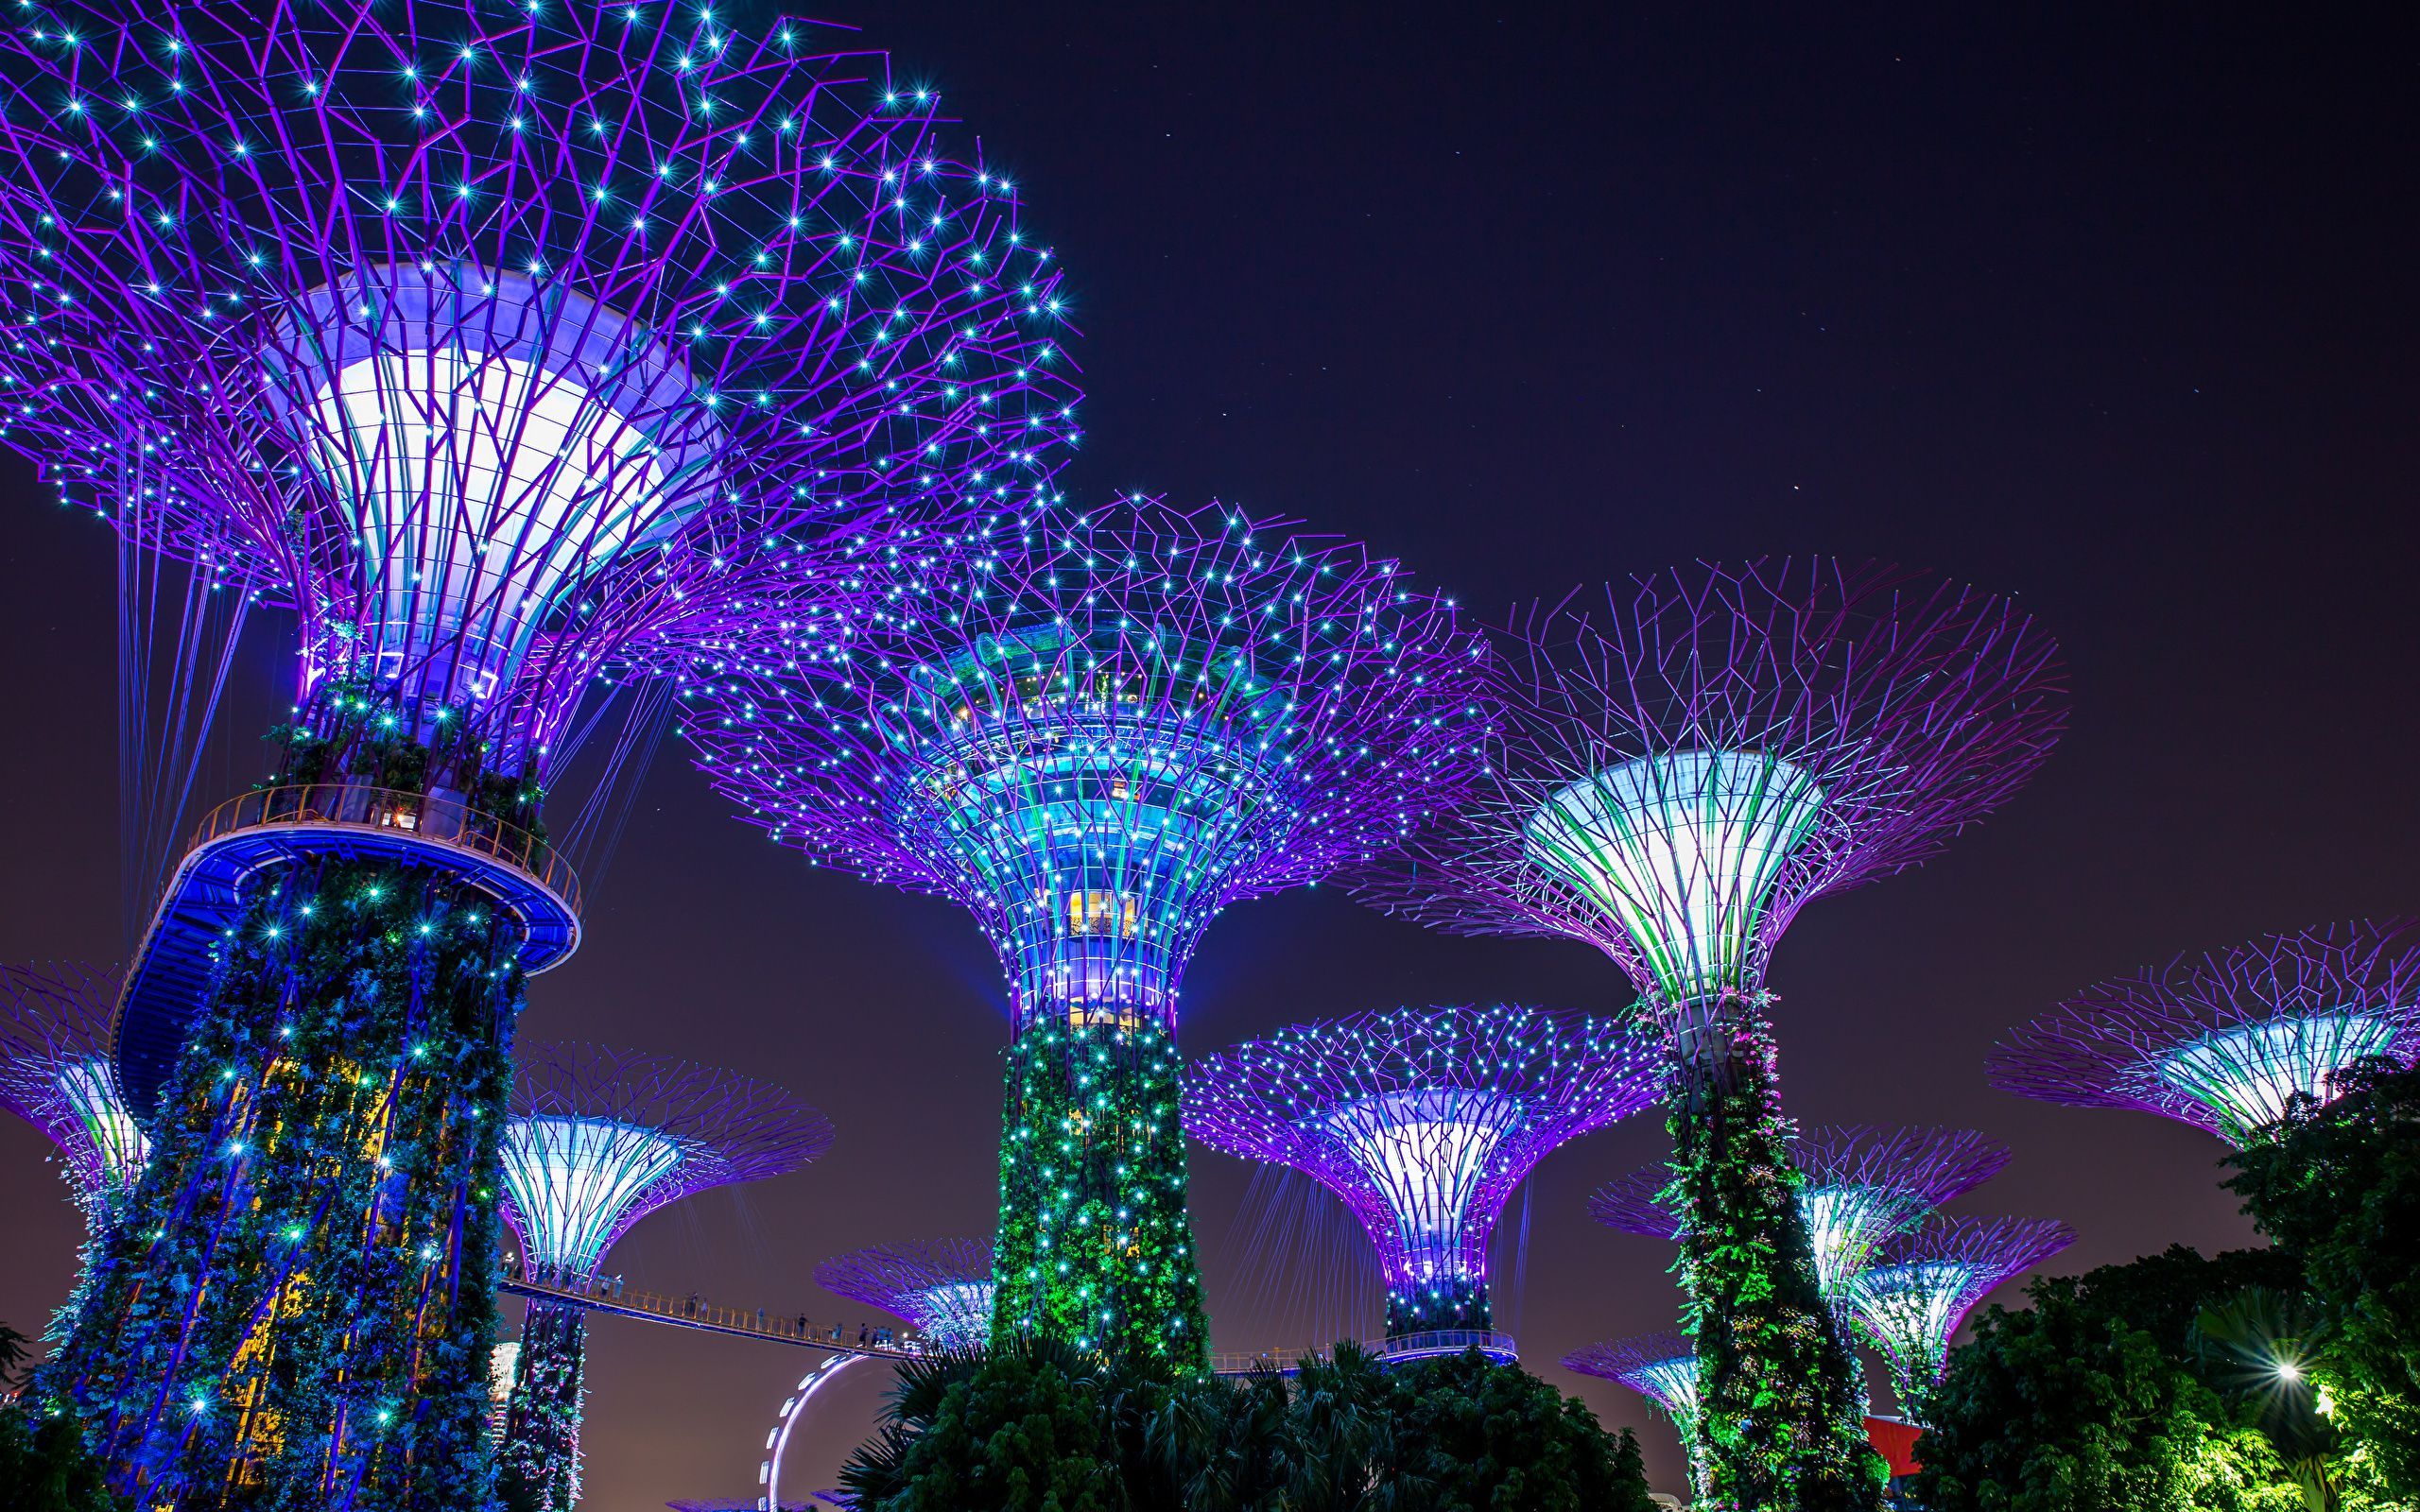 Photo Singapore Gardens by the Bay Nature night time Fairy lights 2560x1600 Night